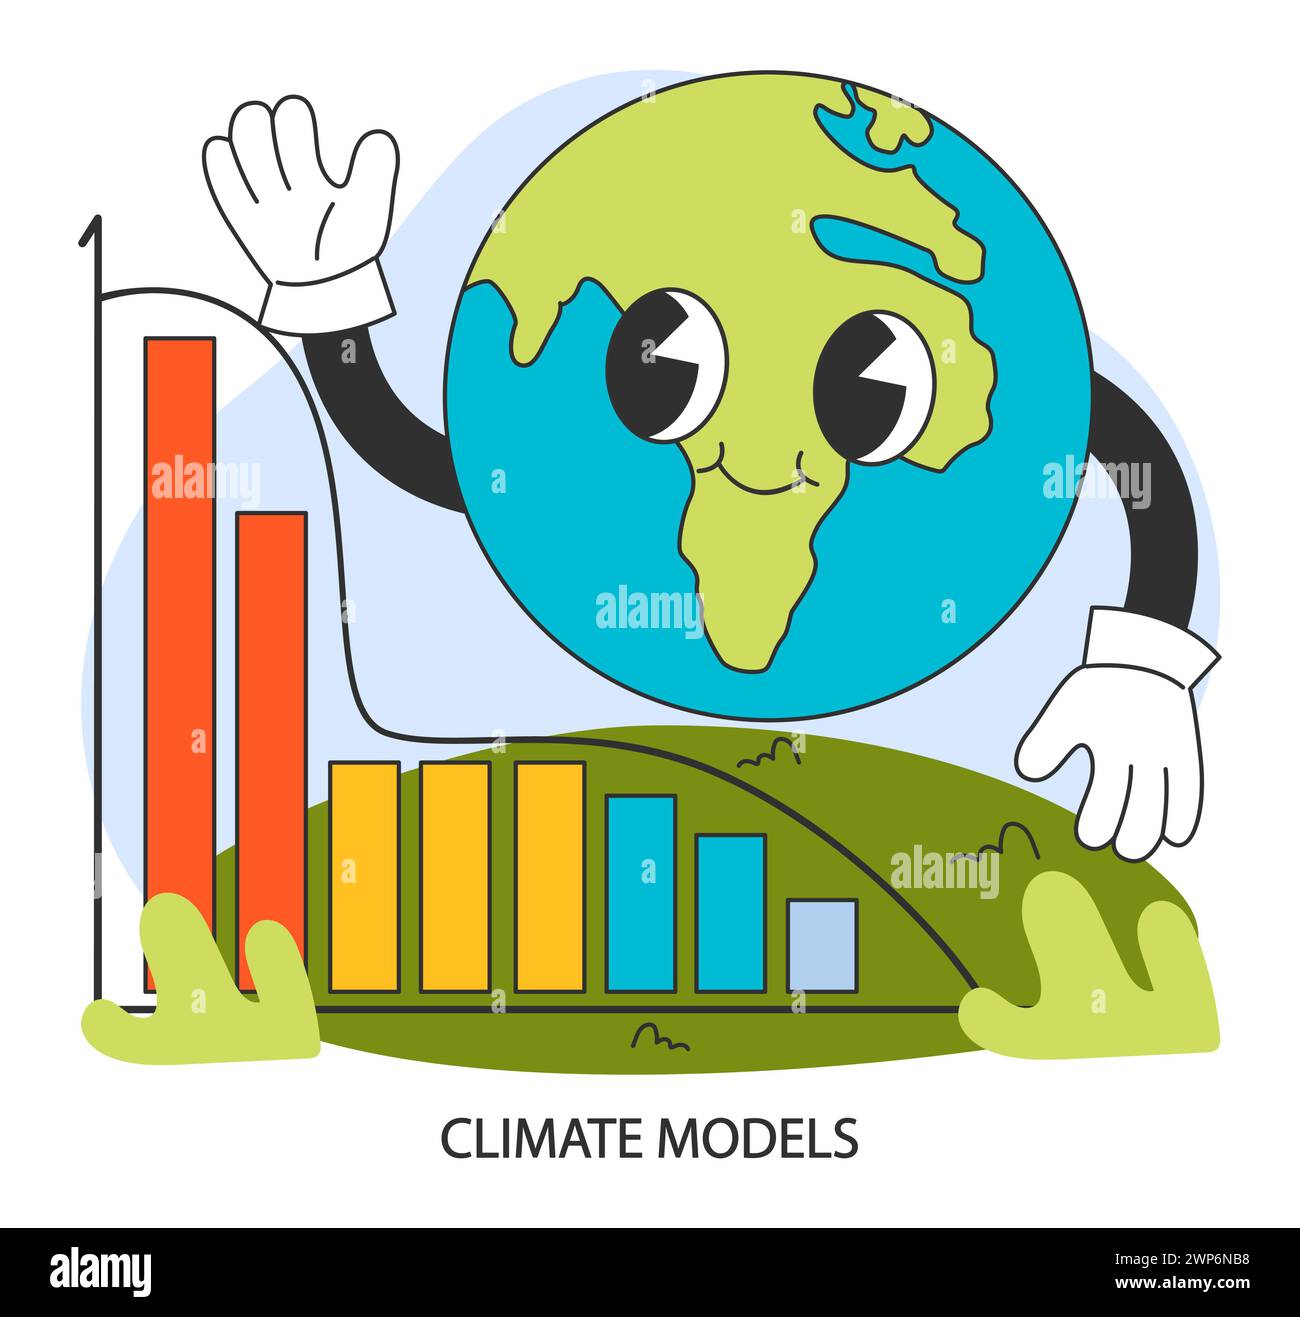 Climate models. Global warming solutions. Weather patterns research and prediction. GCM, major climate system components atmosphere, land, ocean. Flat vector illustration. Stock Vector